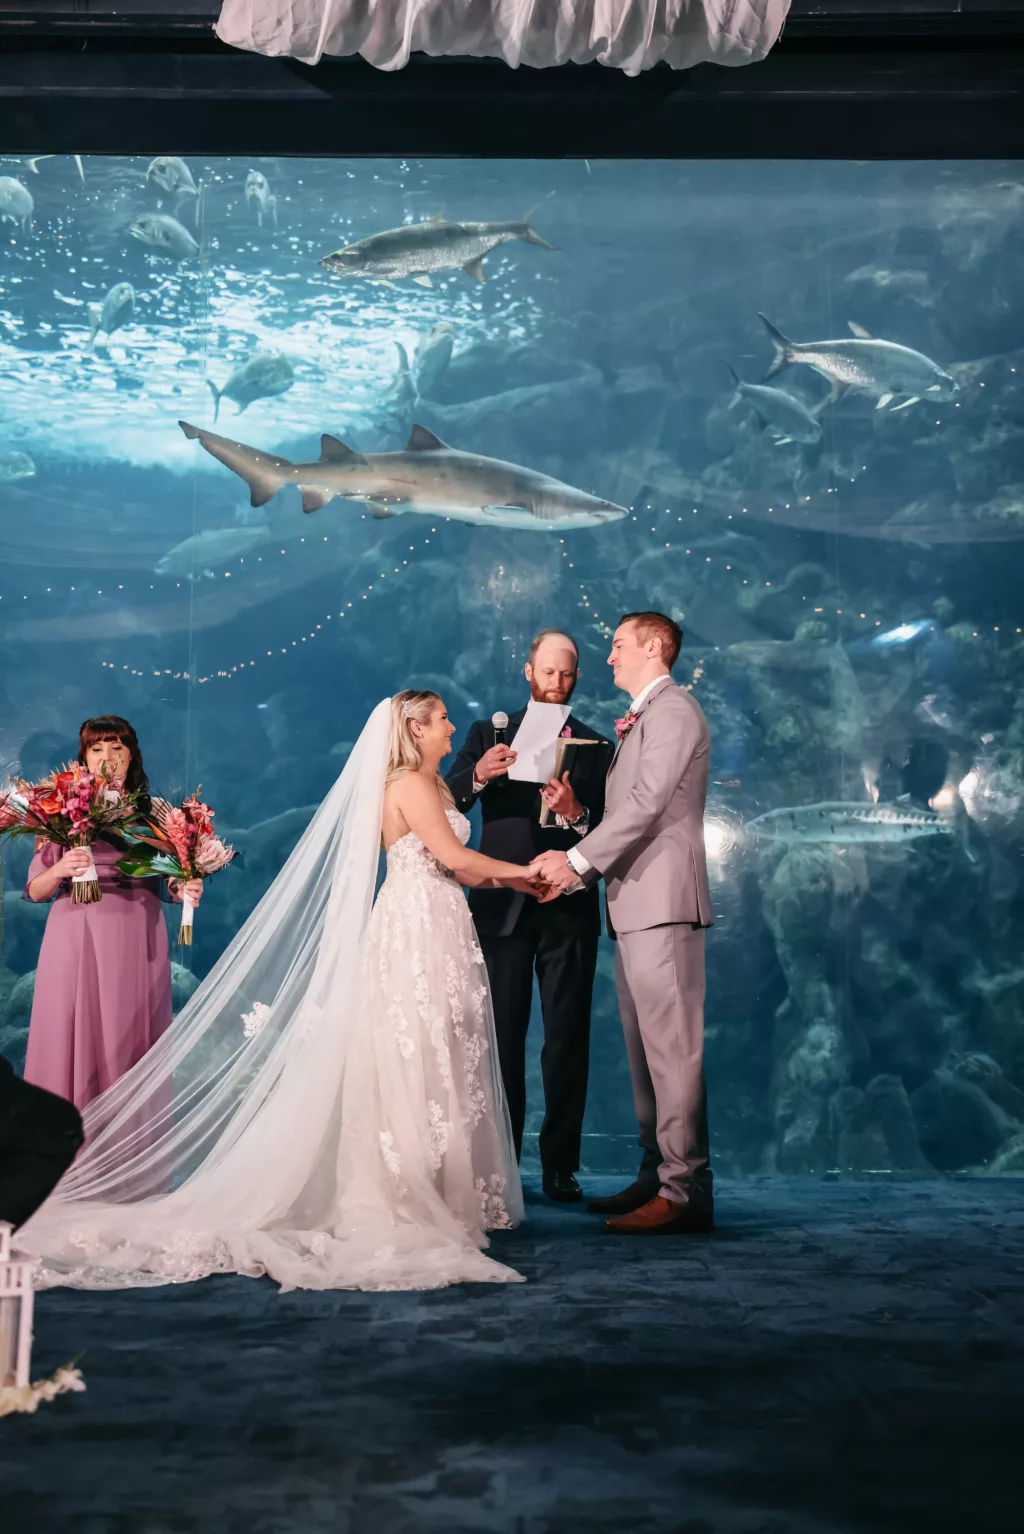 Bride and Groom Wedding Ceremony Vow Exchange in the Coral Reef Gallery Ideas | Tampa Bay Event Venue The Florida Aquarium | Boutique Truly Forever Bridal Tampa